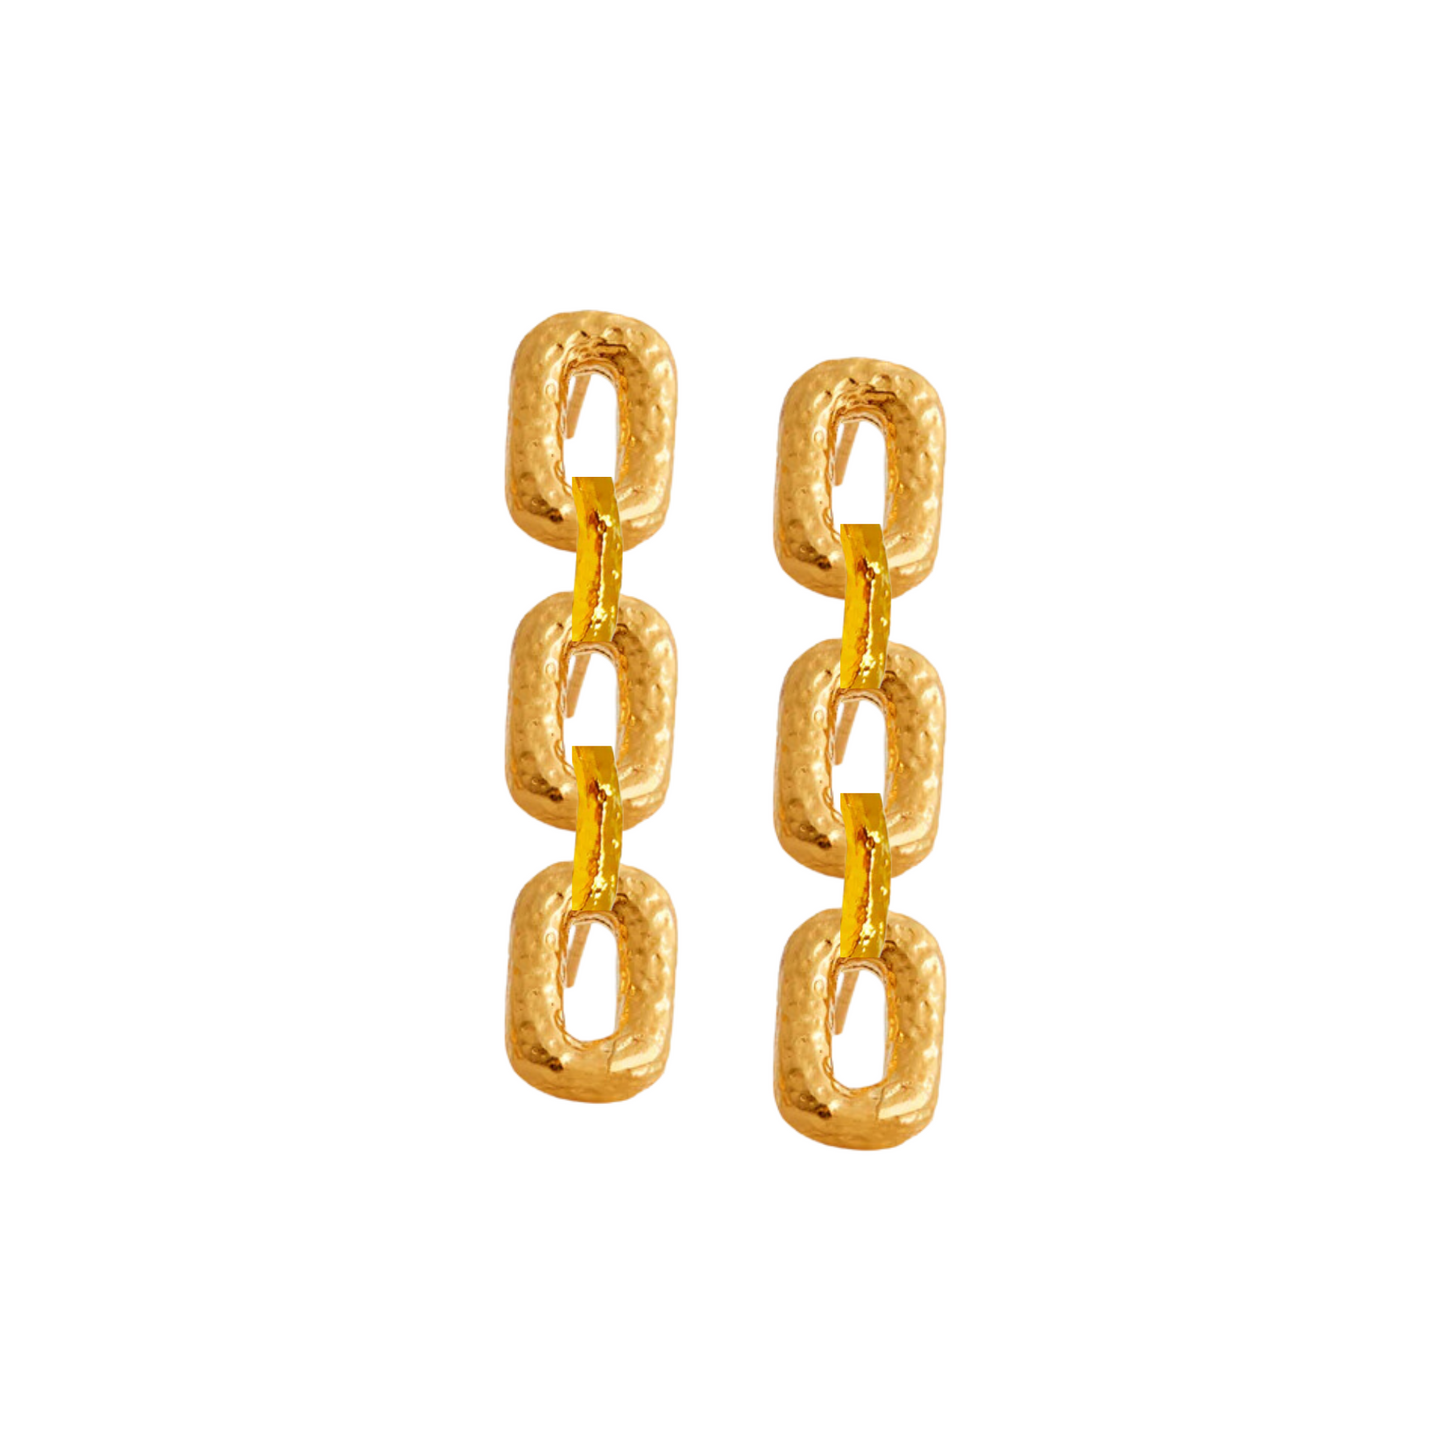 Connected Mini Link Earrings (Gold)